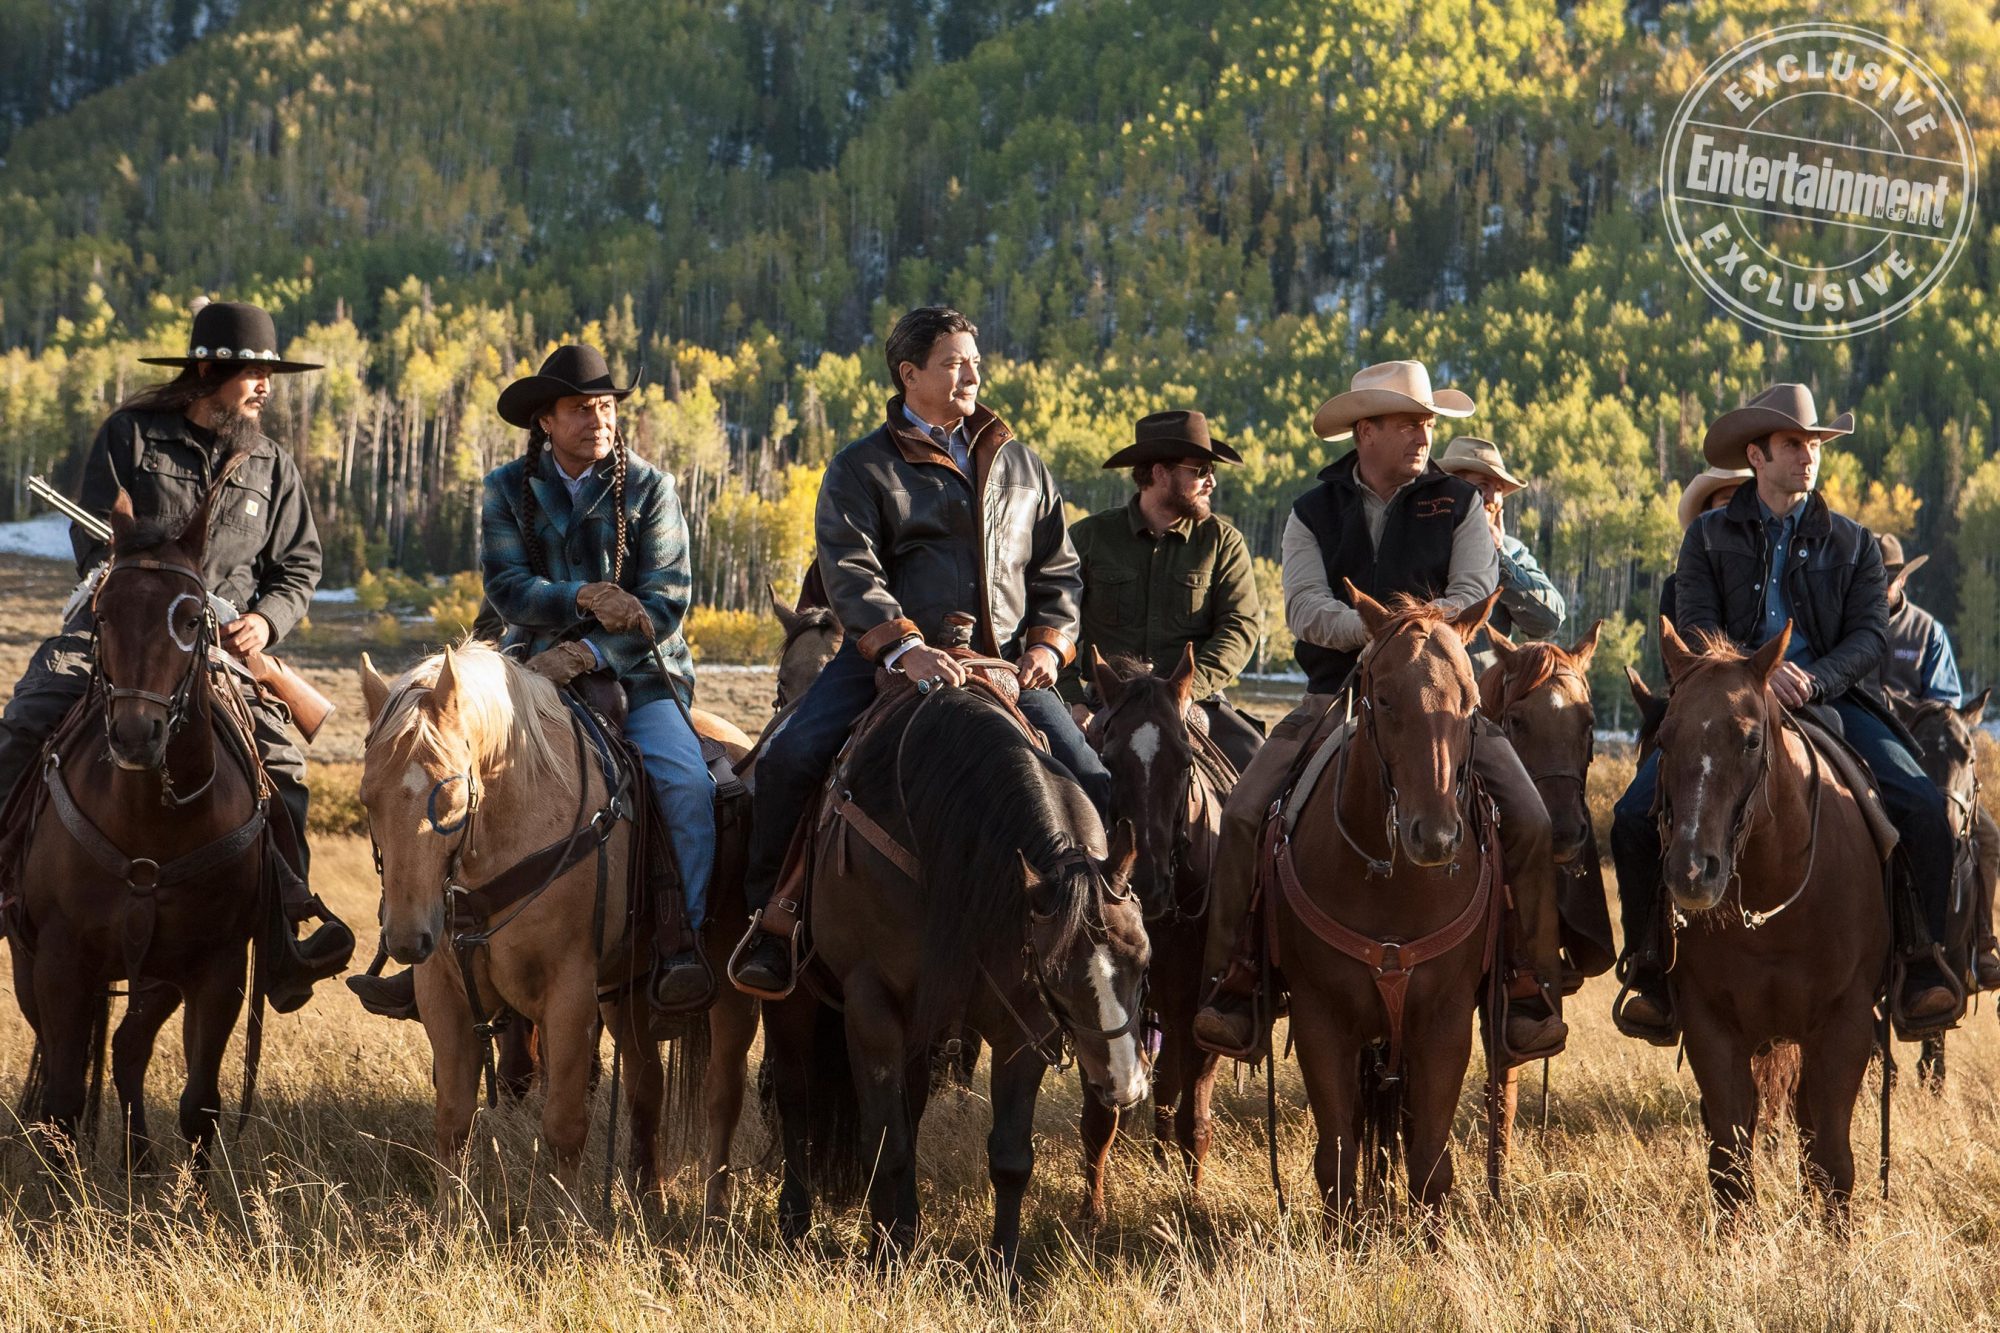 Kevin Costner in Yellowstone: Exclusive image of Paramount's new Western